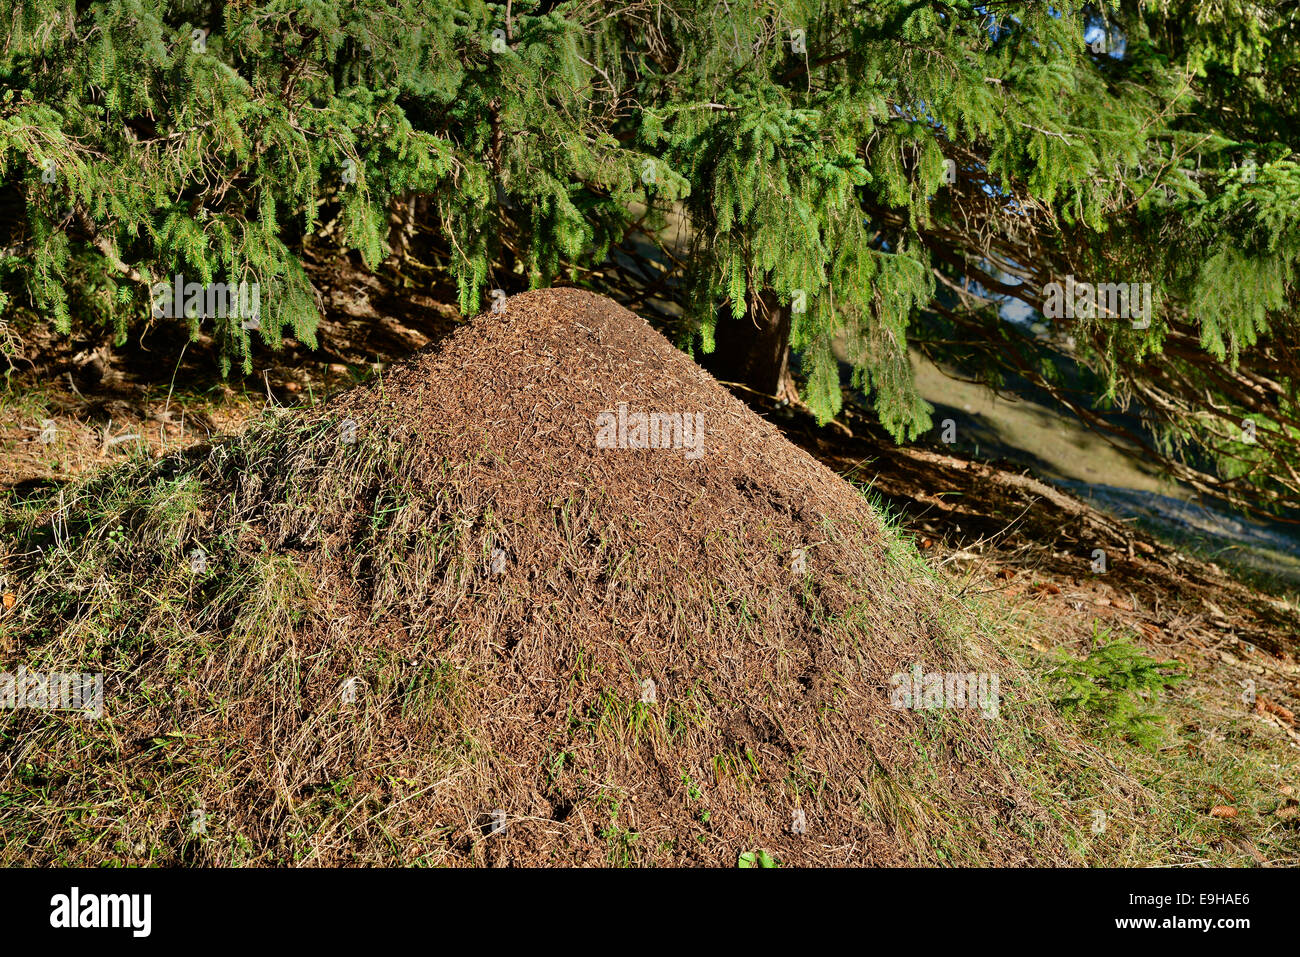 Anthill of the Big Red Wood Ant (Formica rufa), Tyrol, Austria Stock Photo